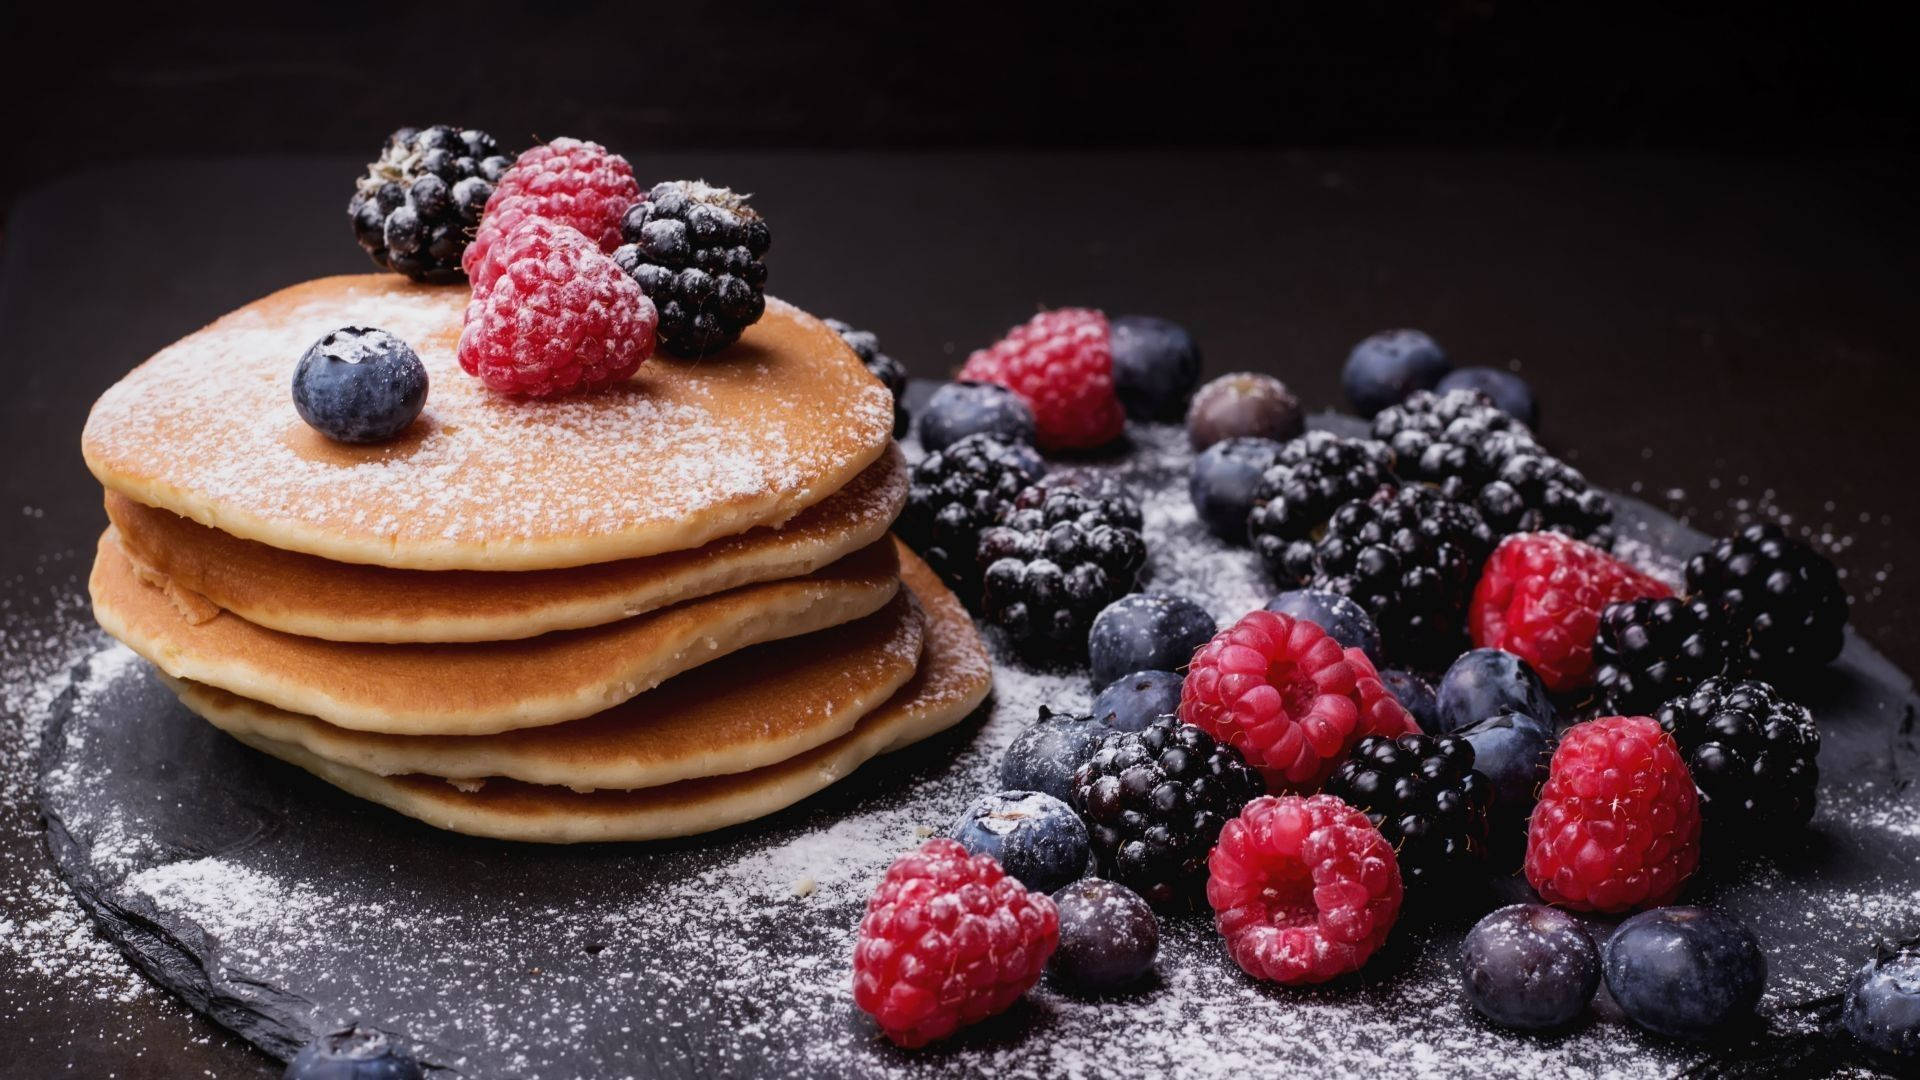 Delicious Pancakes Topped With Sugar And Berries